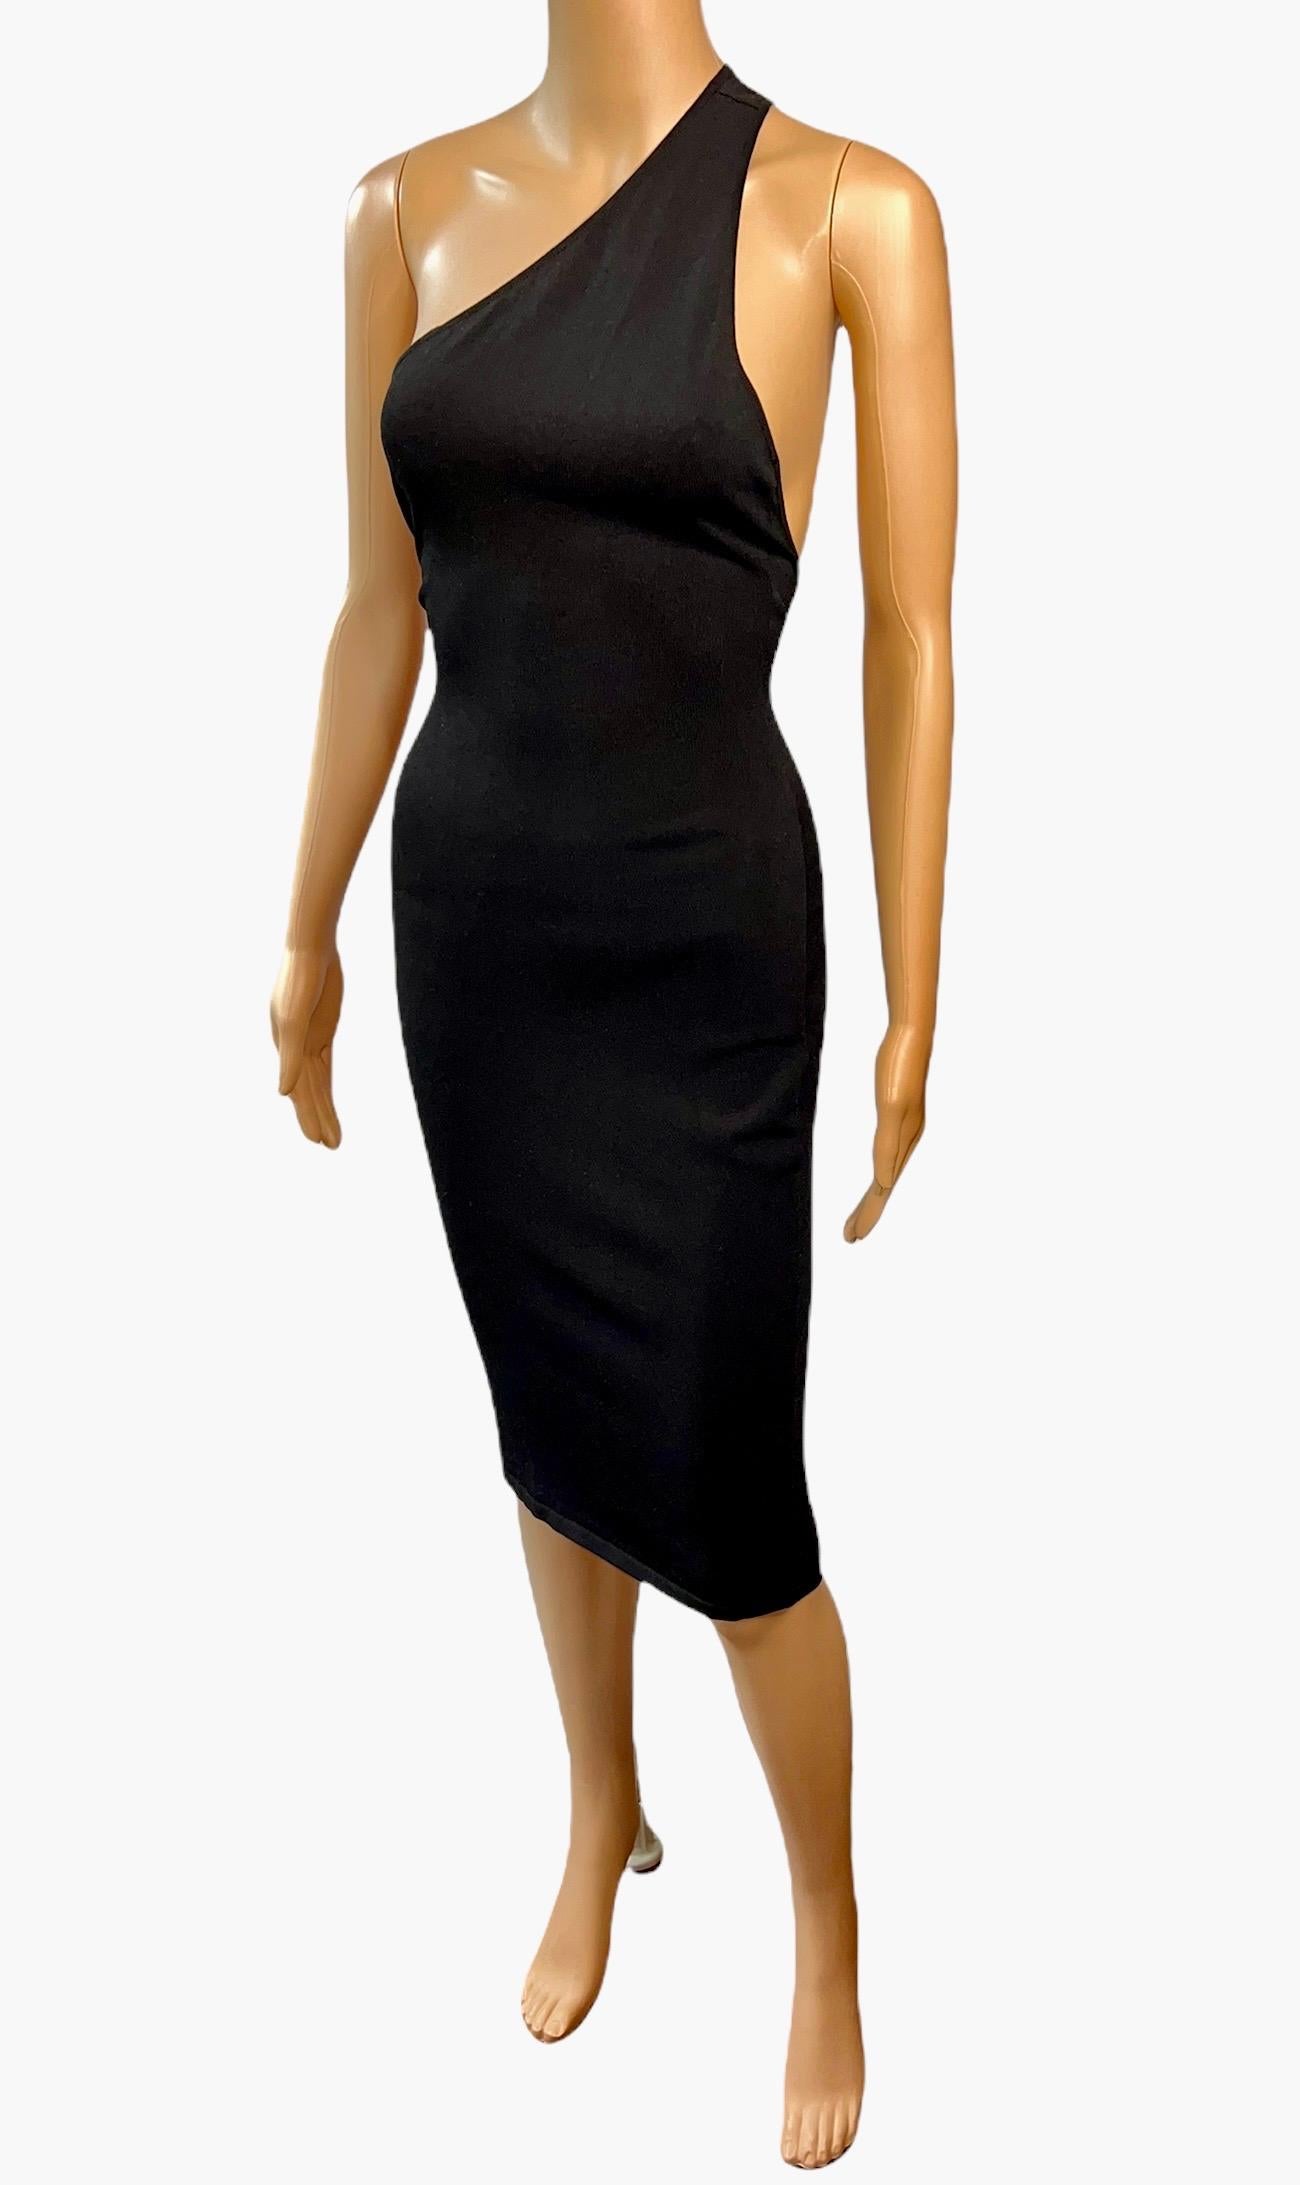 Women's or Men's Tom Ford for Gucci S/S 2000 Cutout Bodycon Knit Black Dress For Sale